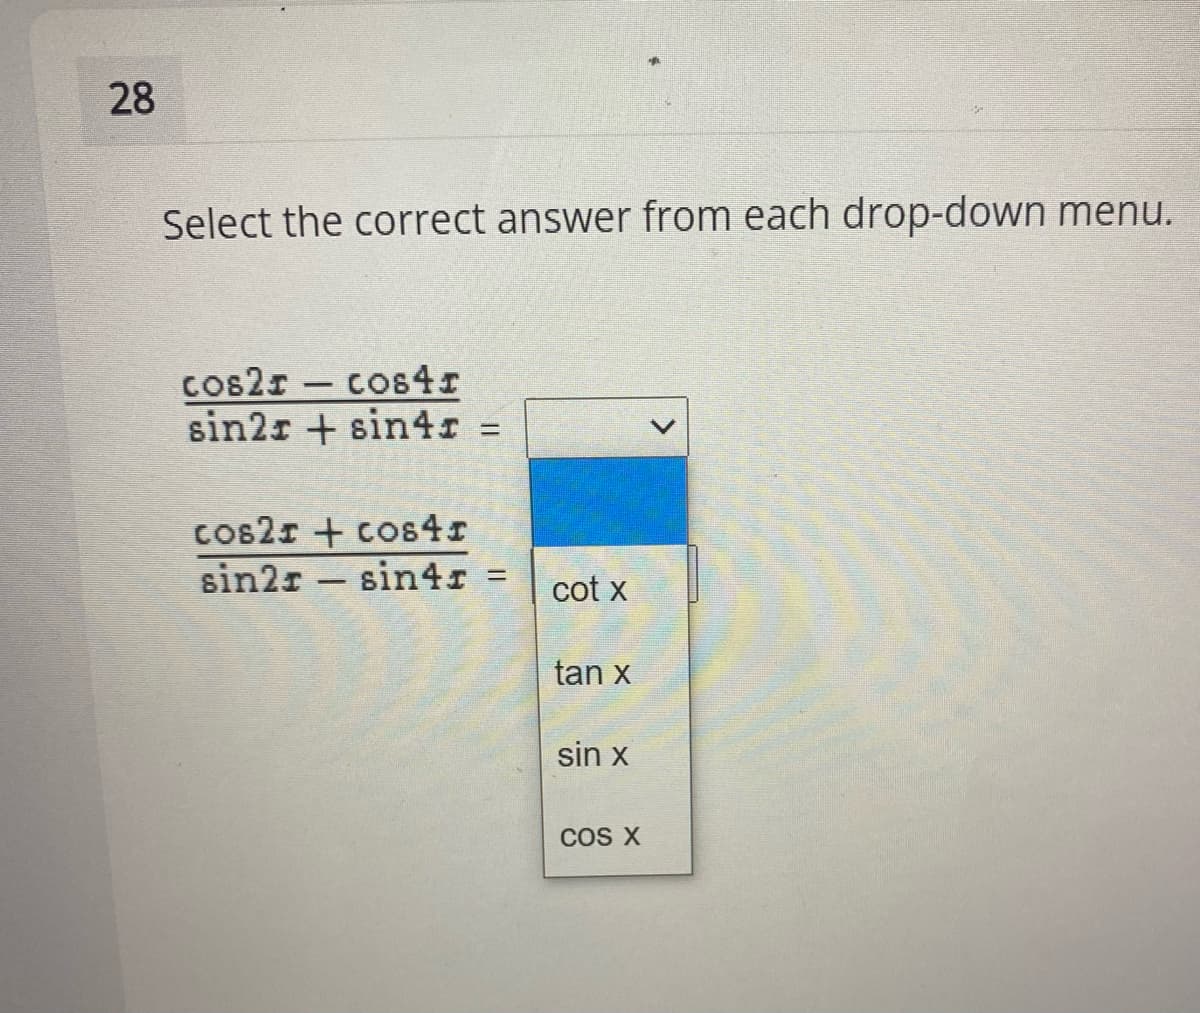 28
Select the correct answer from each drop-down menu.
cos2r- cos4r
sin2r + sin4I =
cos2r + cos4r
sin2r - sin4r =
cot x
tan x
sin x
COS X
<>
